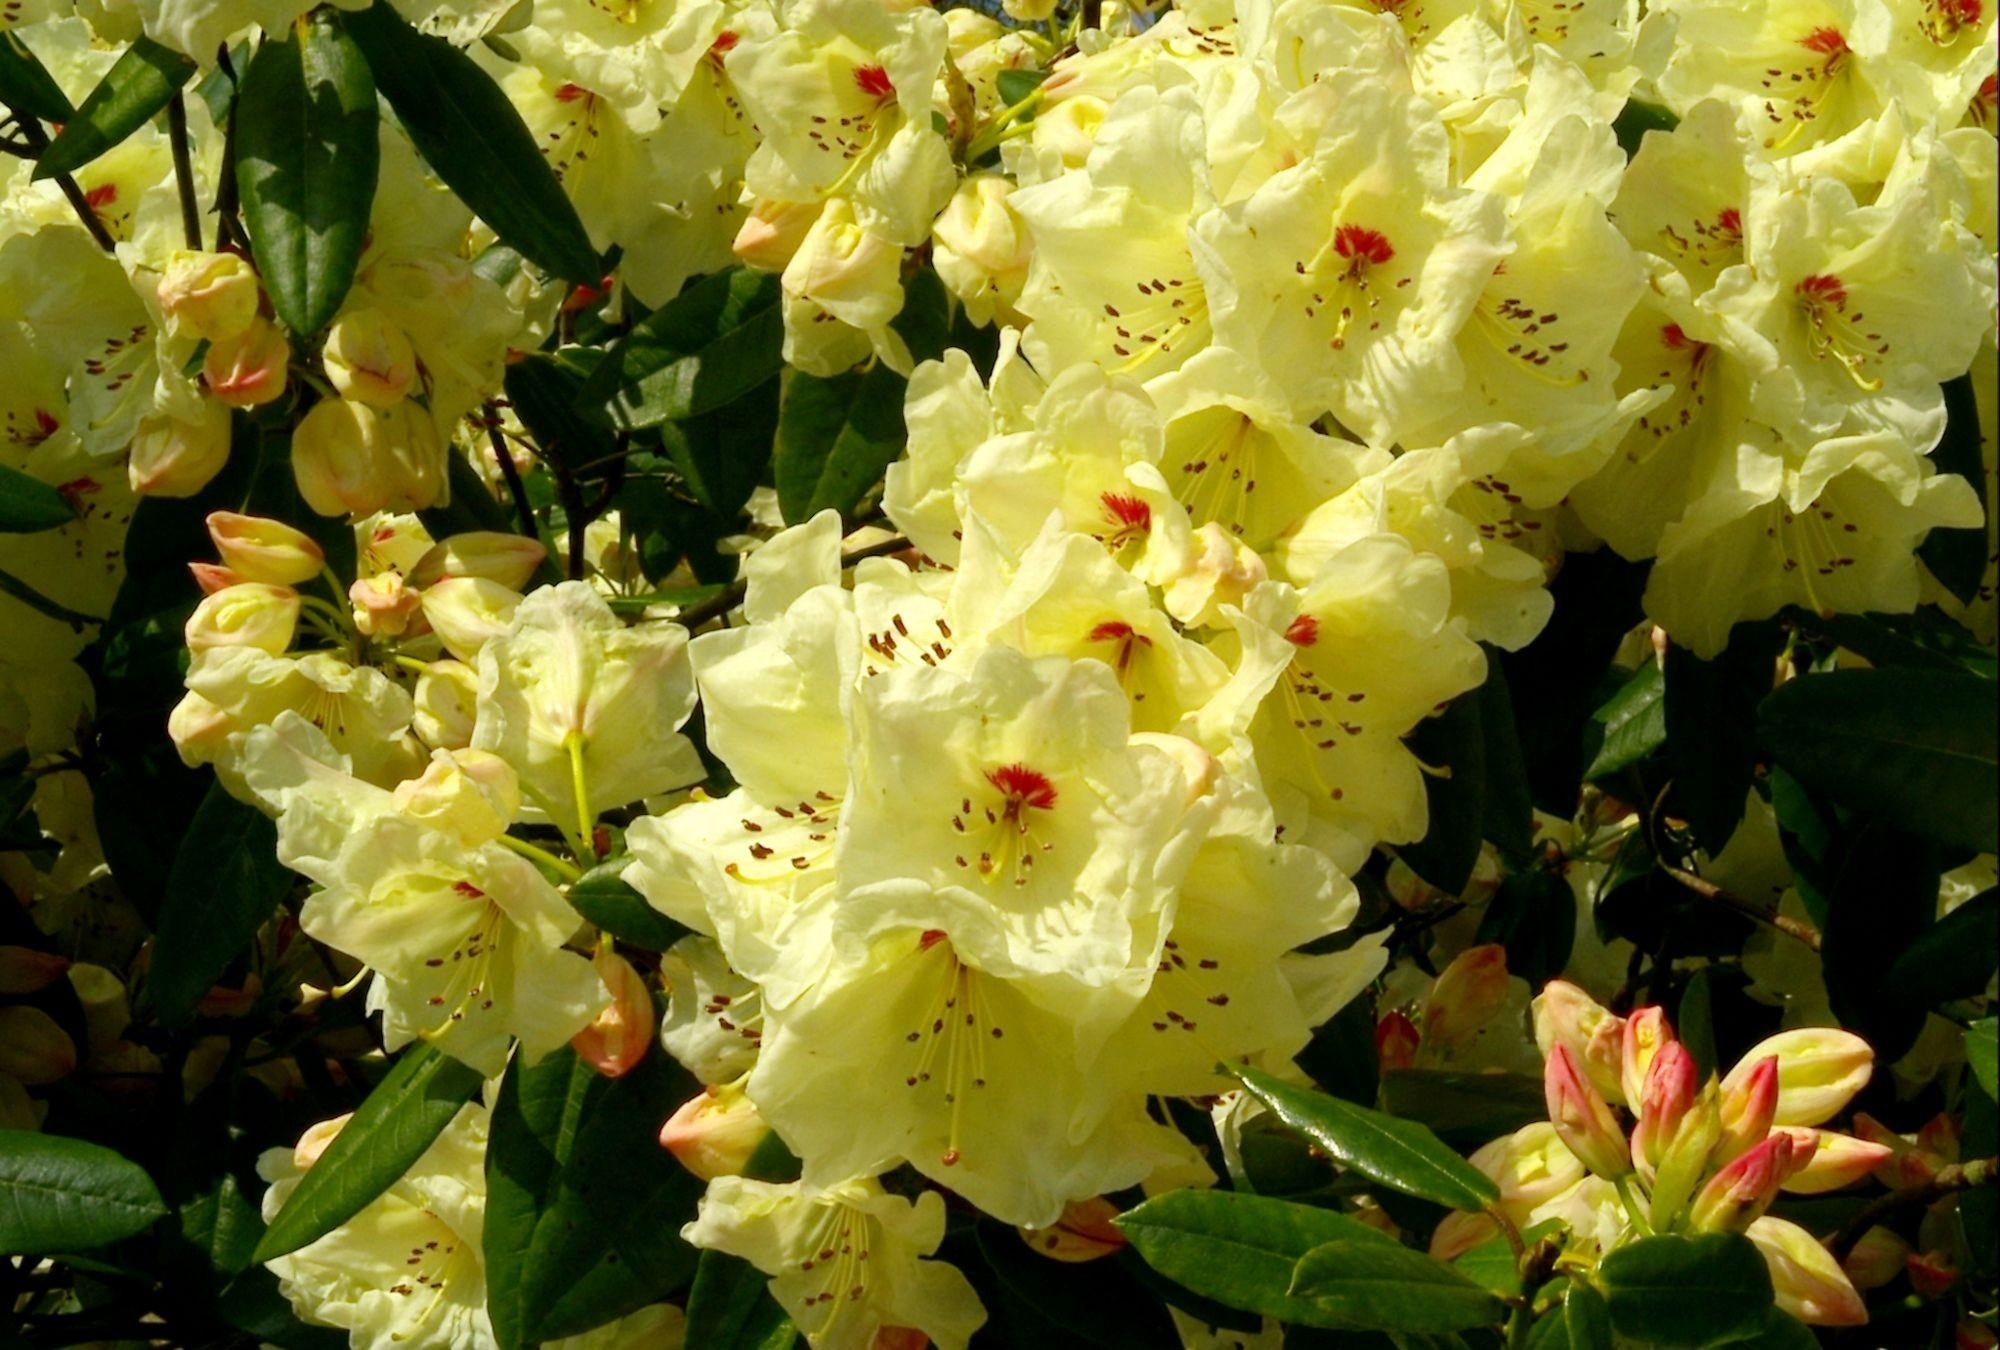 bloom, flowers, bush, close-up, flowering, greens, rhododendron High Definition image